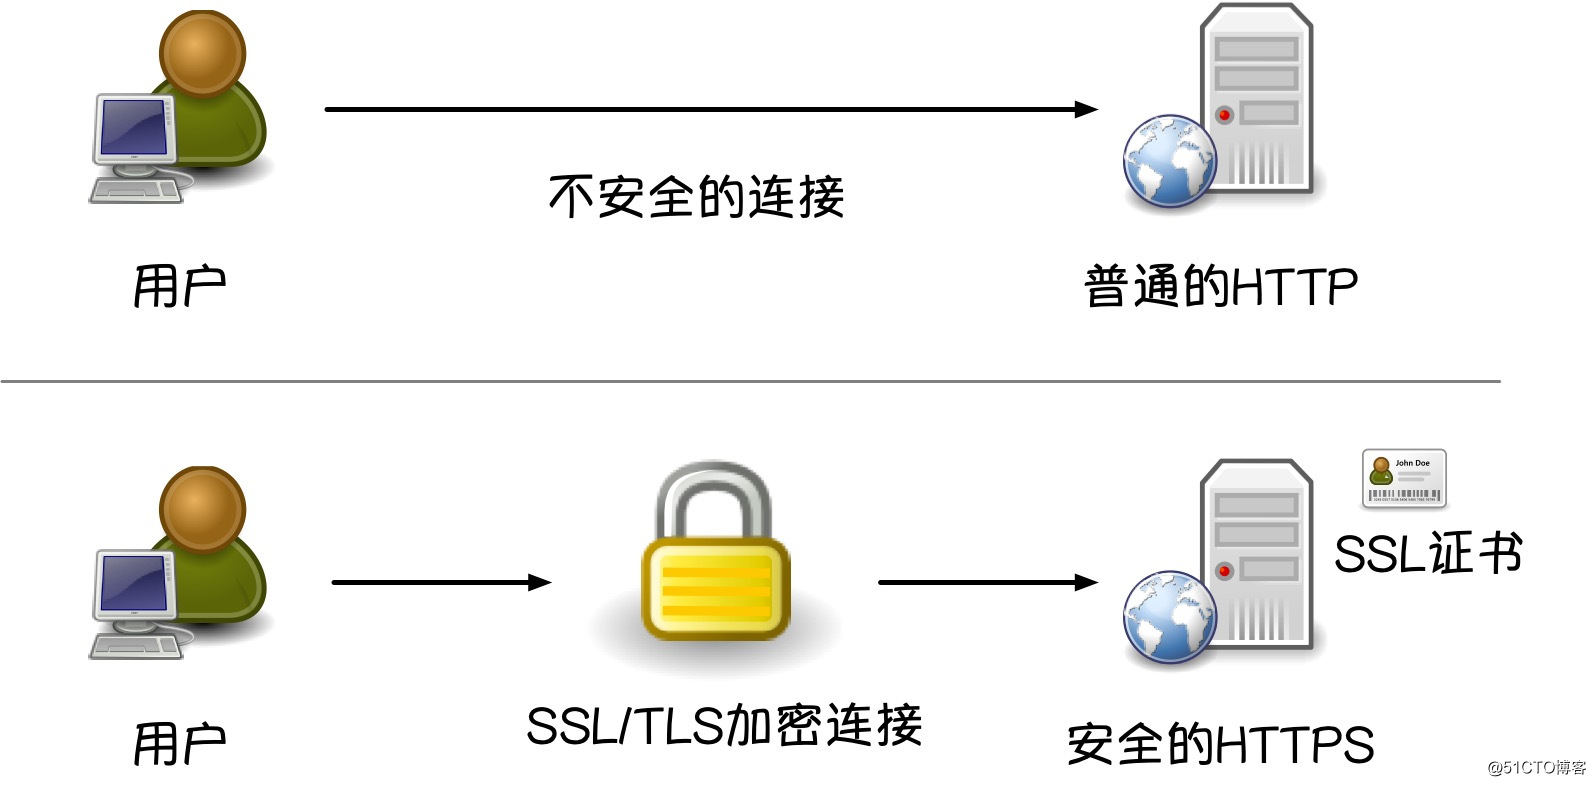 Figure 14: A copy of the schematic diagram of the difference between HTTP and HTTPS.jpg